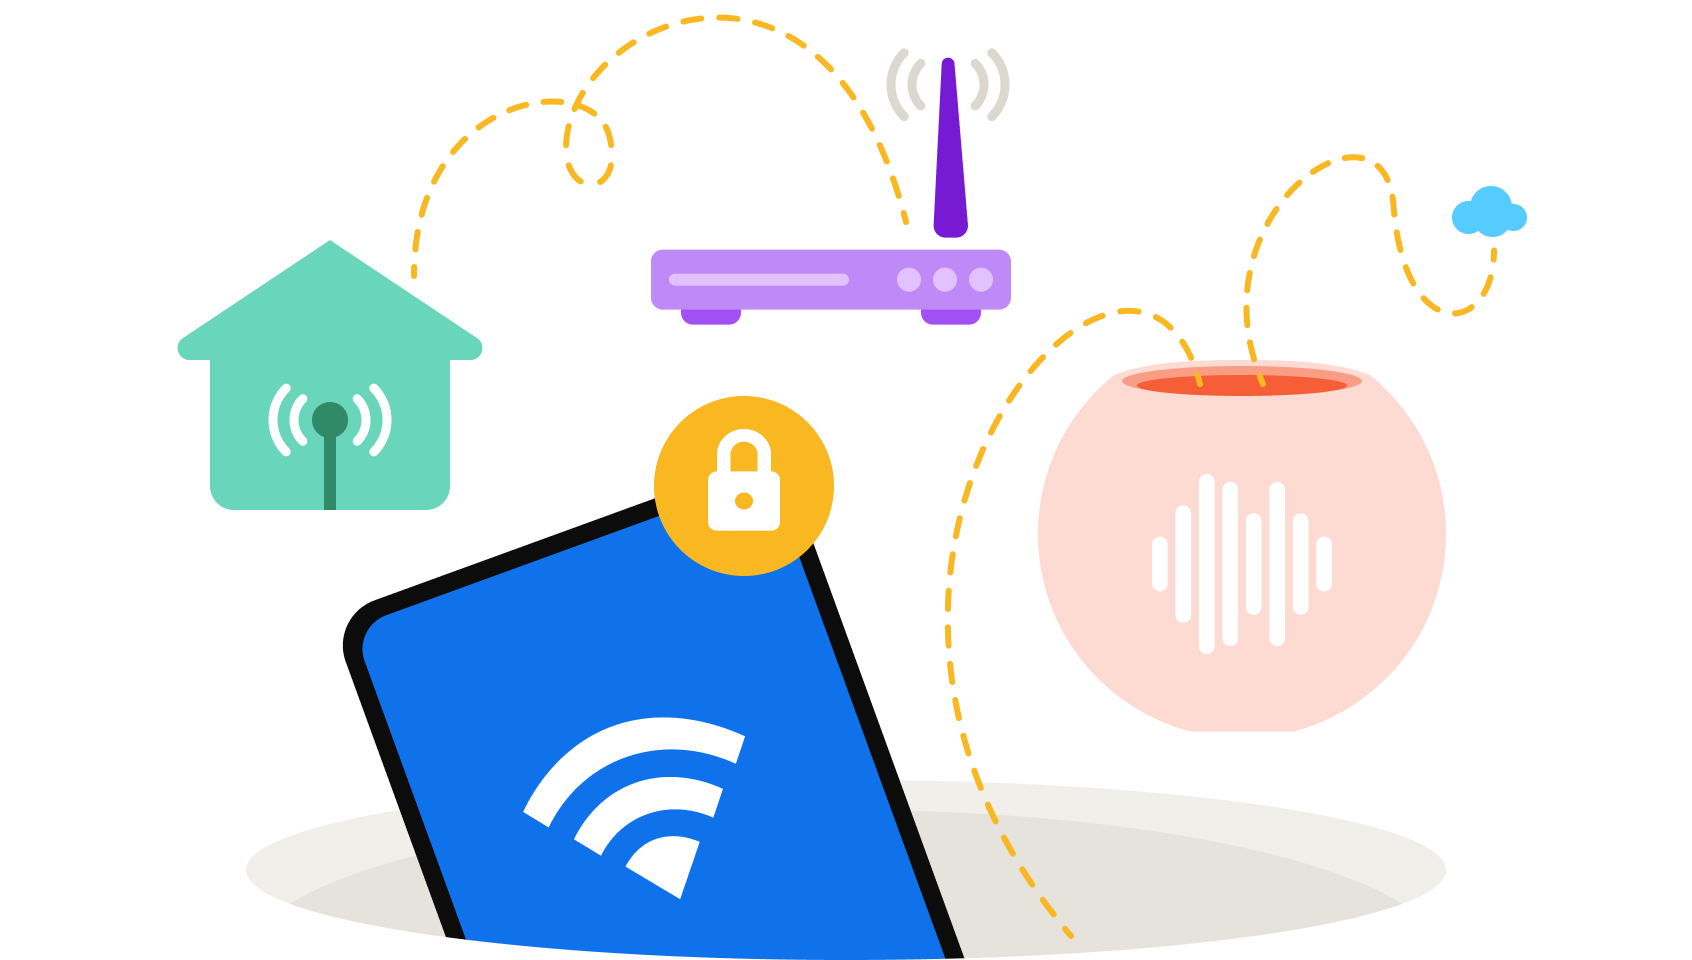 An illustration of things in your home that can be protected, such as a WiFI router and smart IoT devices like a thermostat